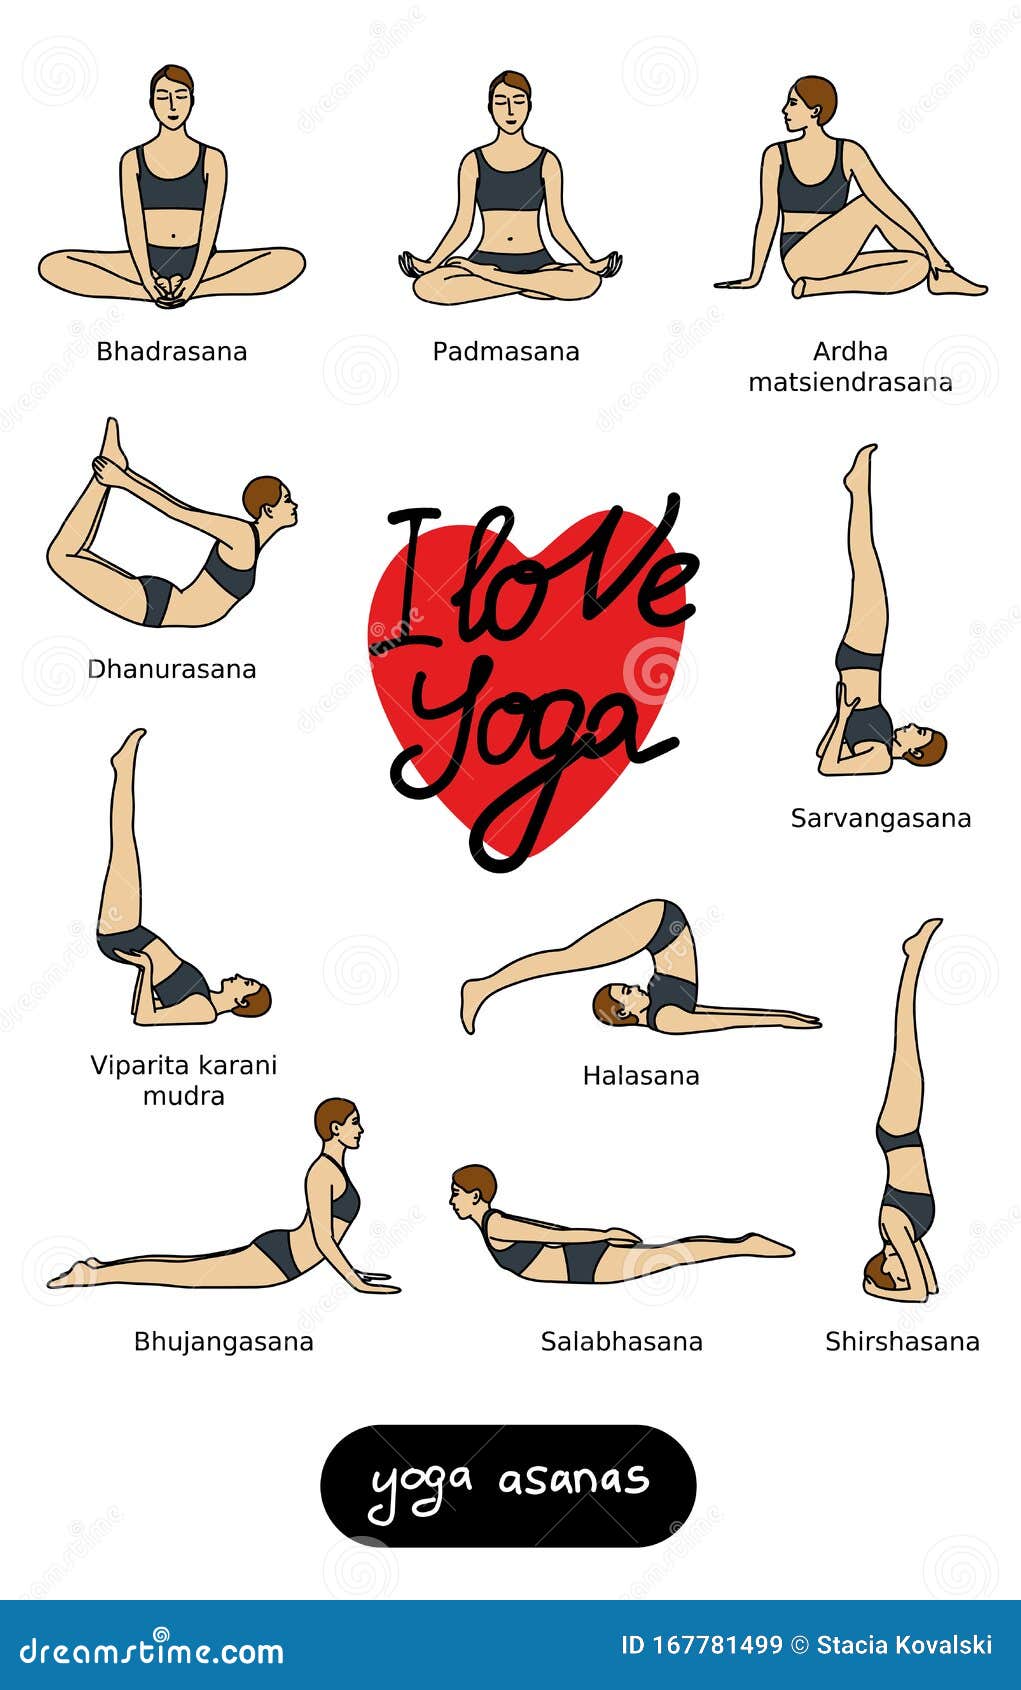 All About Yoga: Poses, Types, Benefits, and More